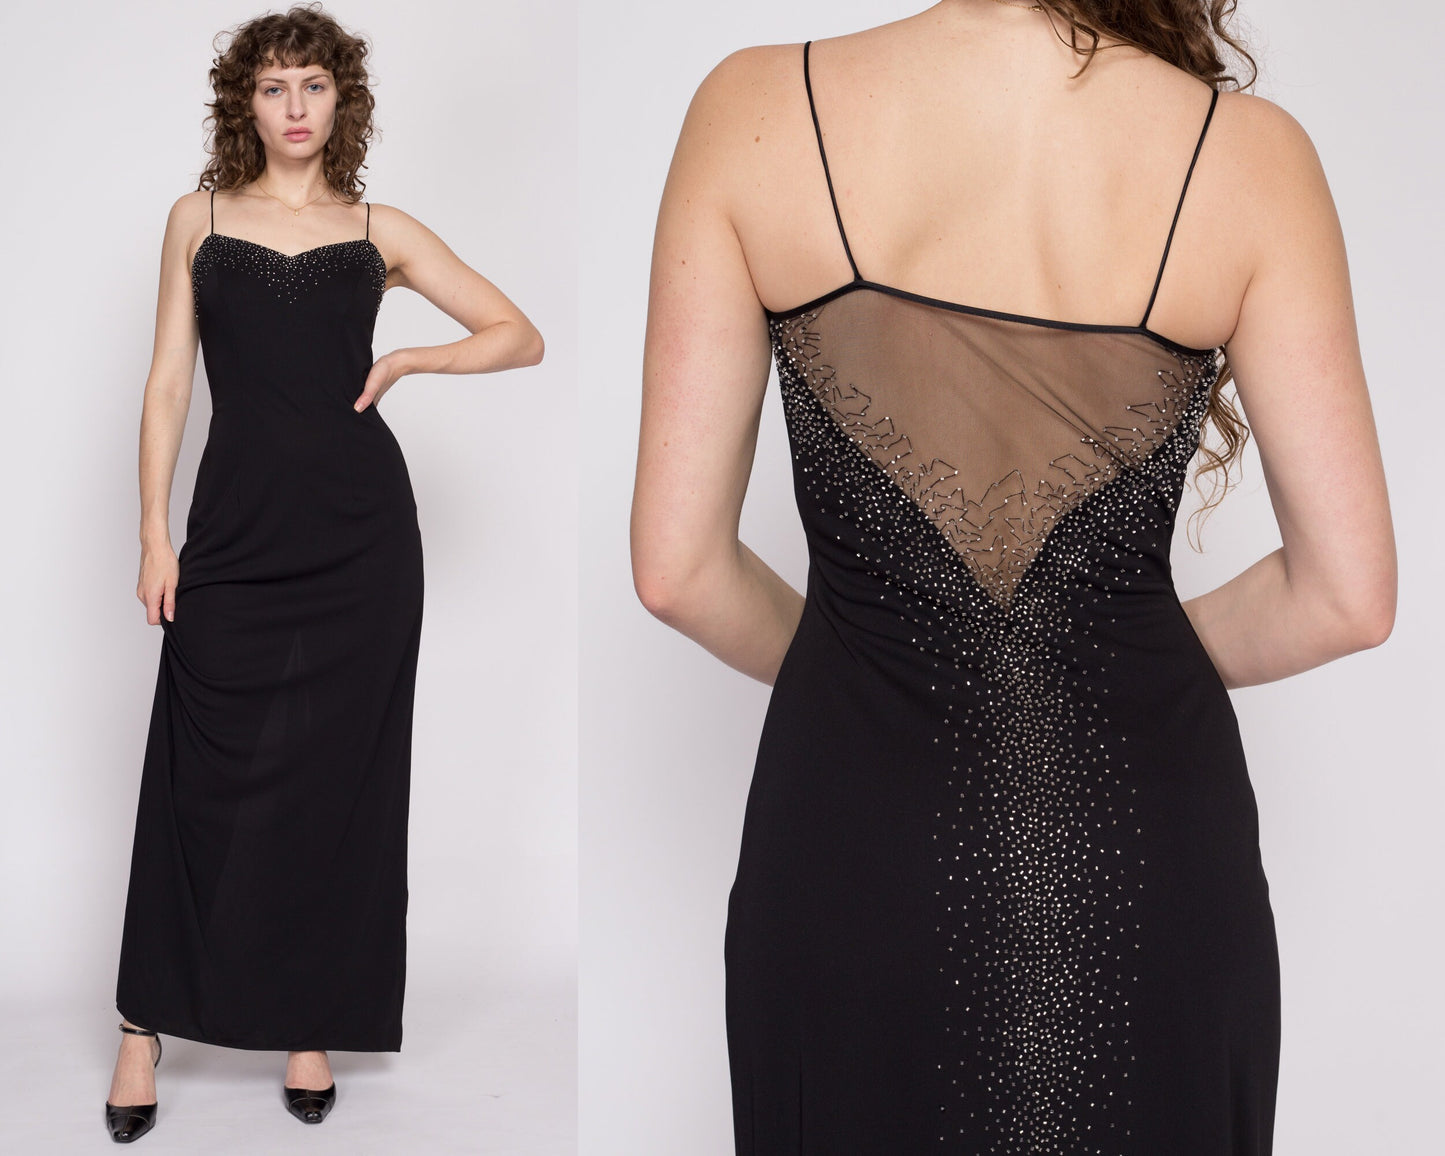 S-M| 90s Dave & Johnny Black Beaded Sheer Low Back Maxi Dress - Small to Medium | Vintage Spaghetti Strap Sleeveless Slinky Sexy Formal Gown